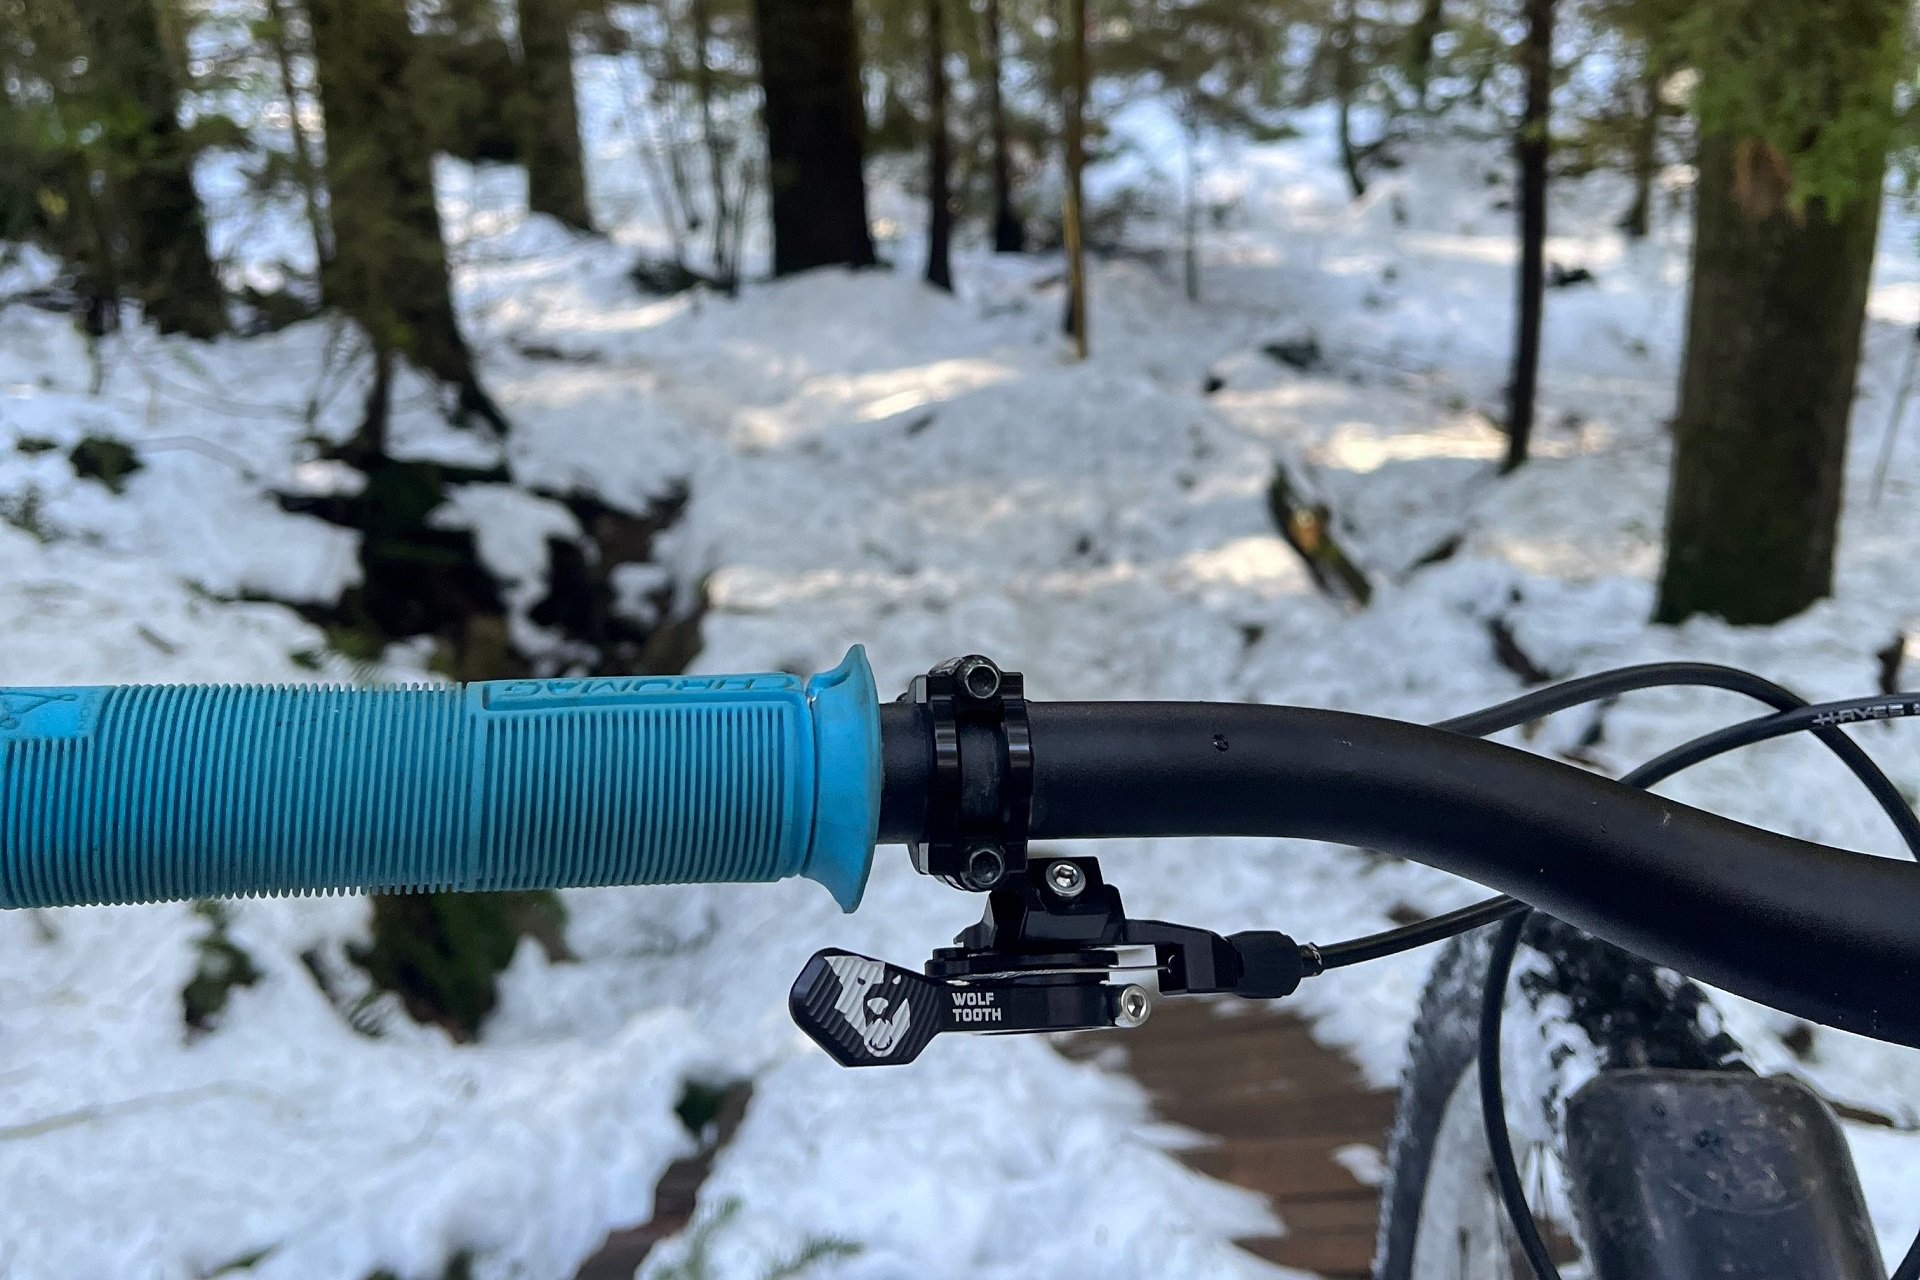 Wolf Tooth Remote Pro Dropper Lever - Magura